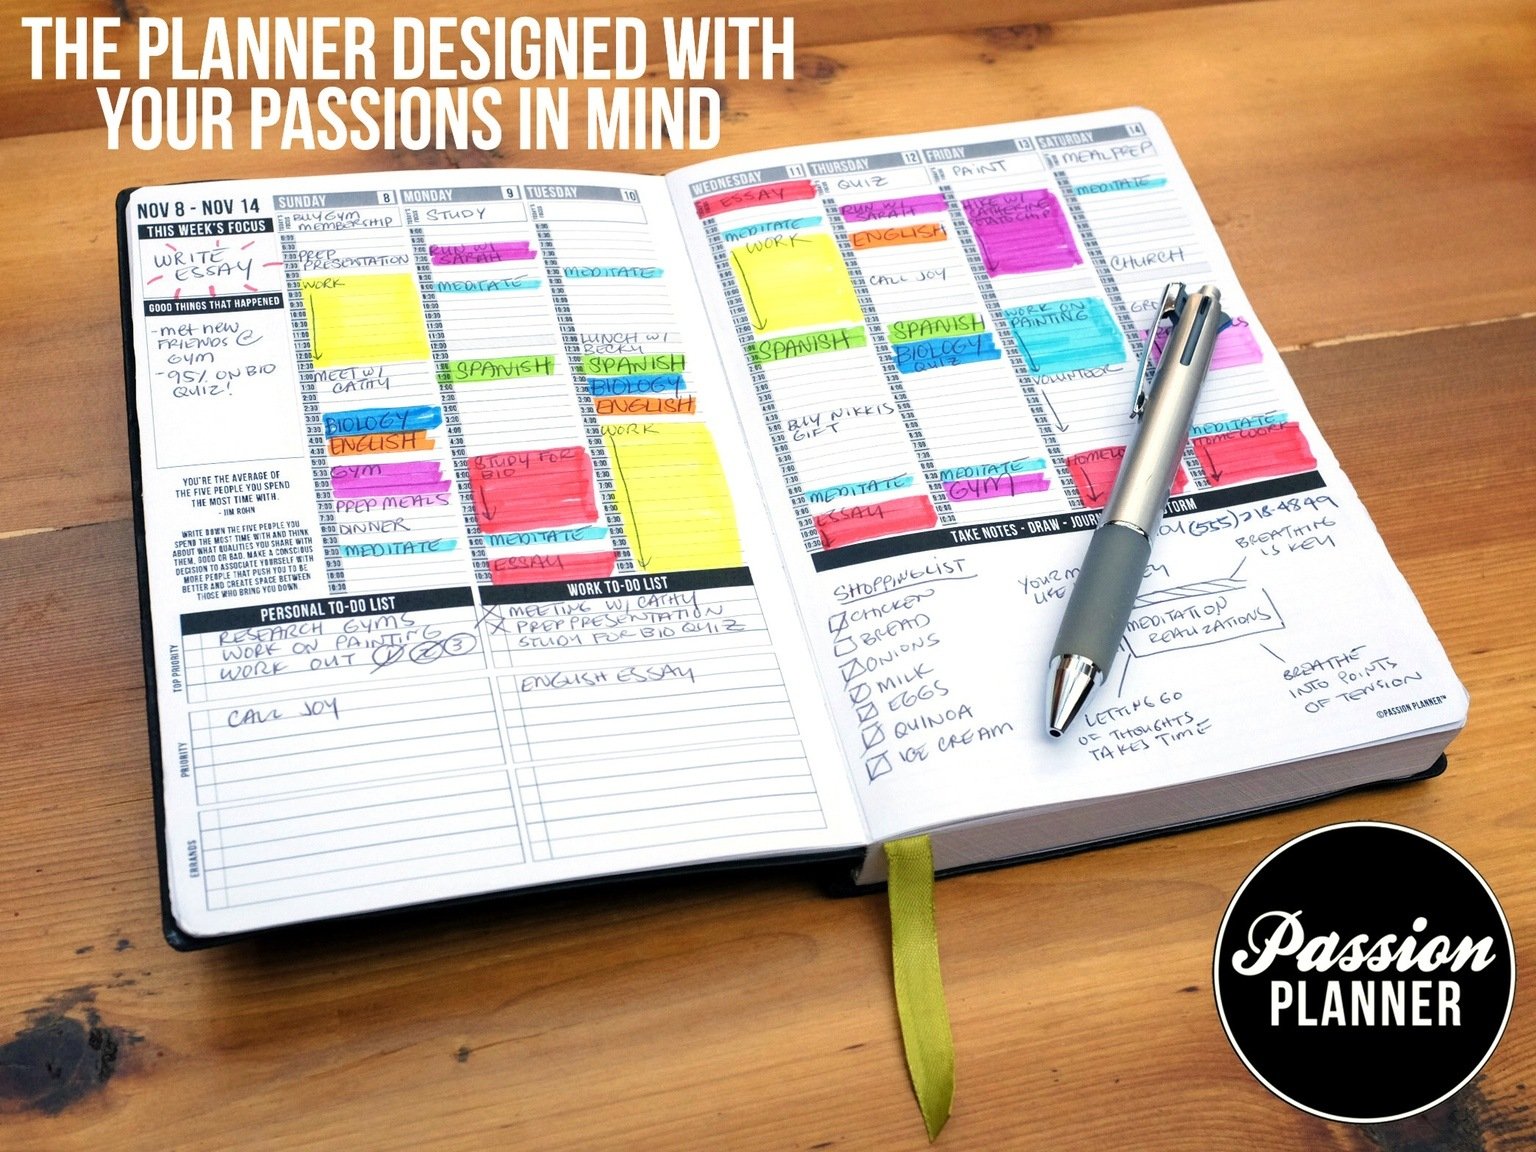 The Passion Planner